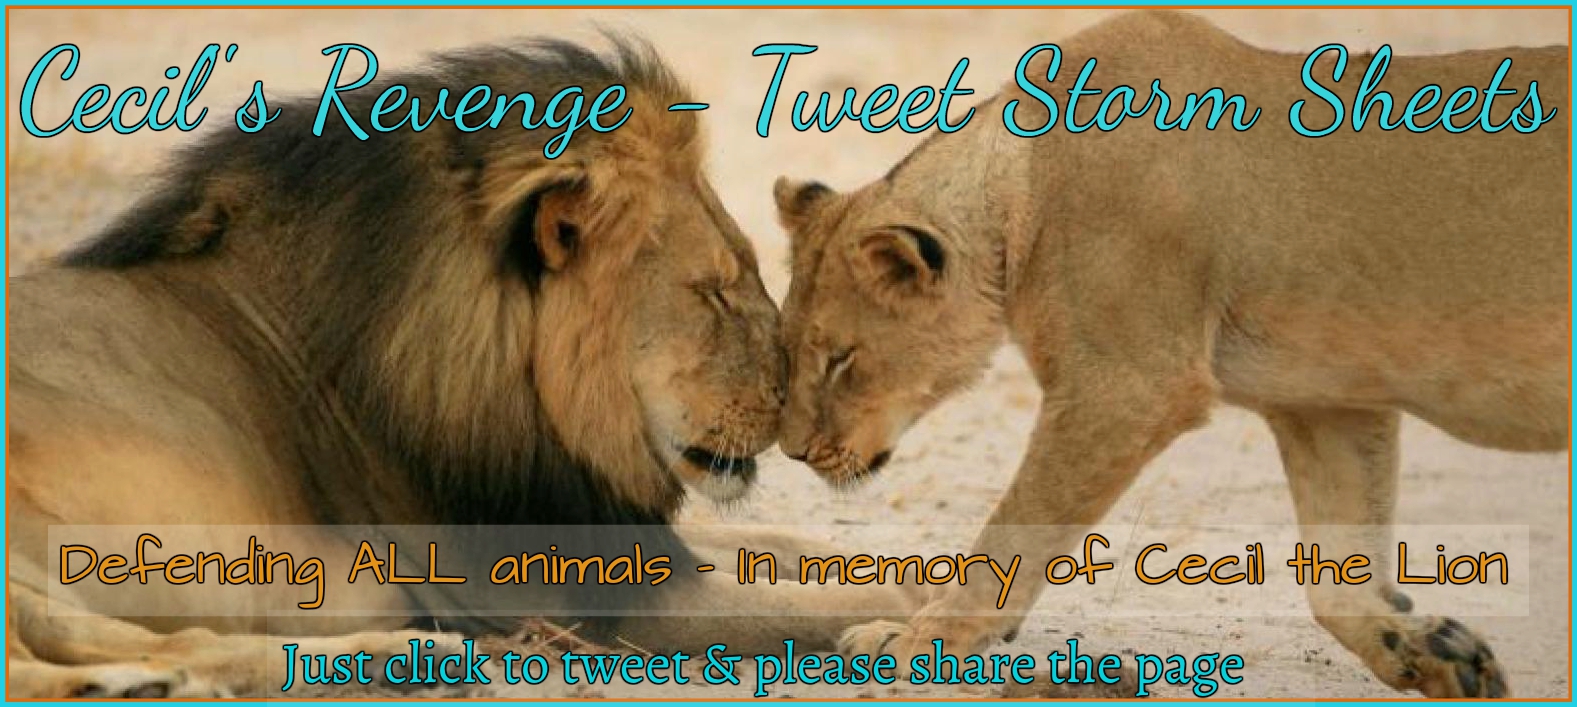 Cecil's Revenge Tweet Sheets – It's time to Storm!